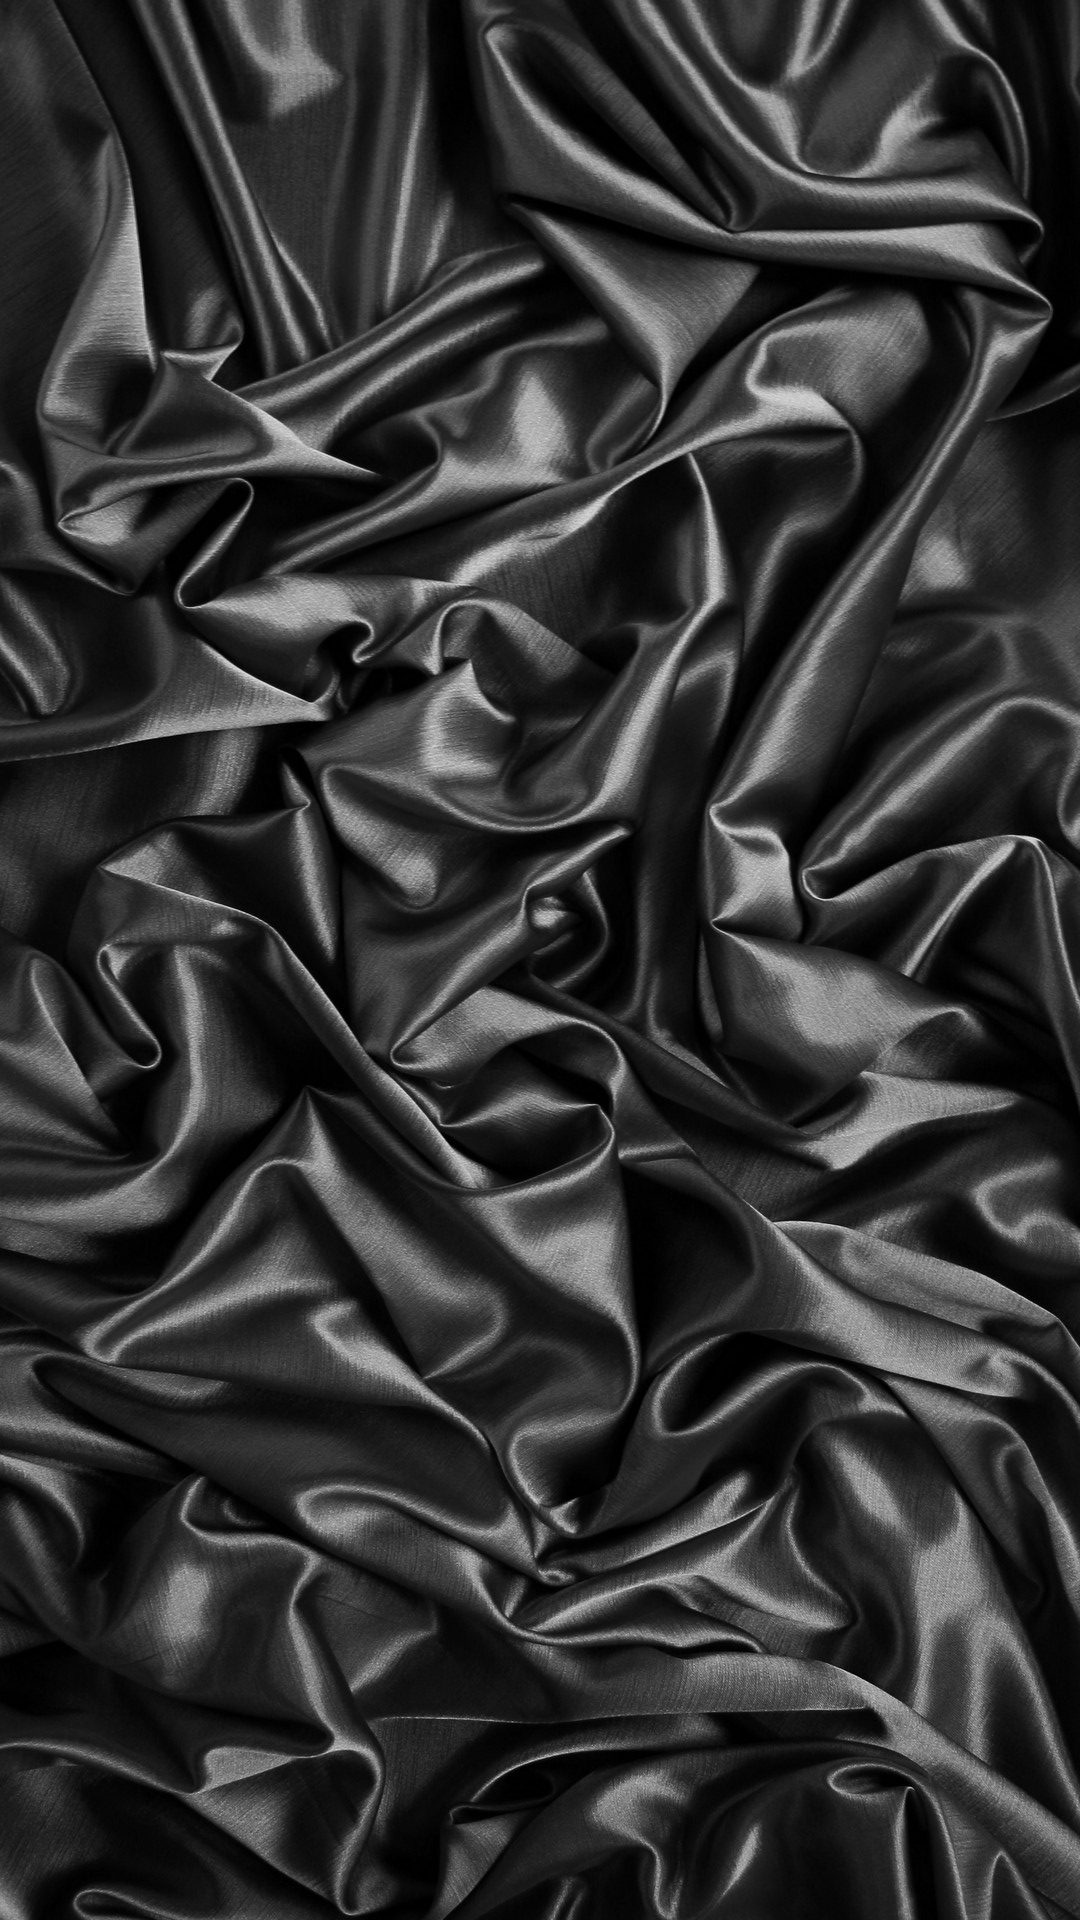 iPhone Wallpaper HD Black Silk With high-resolution 1920X1080 pixel. You can use this wallpaper for your iPhone 5, 6, 7, 8, X, XS, XR backgrounds, Mobile Screensaver, or iPad Lock Screen